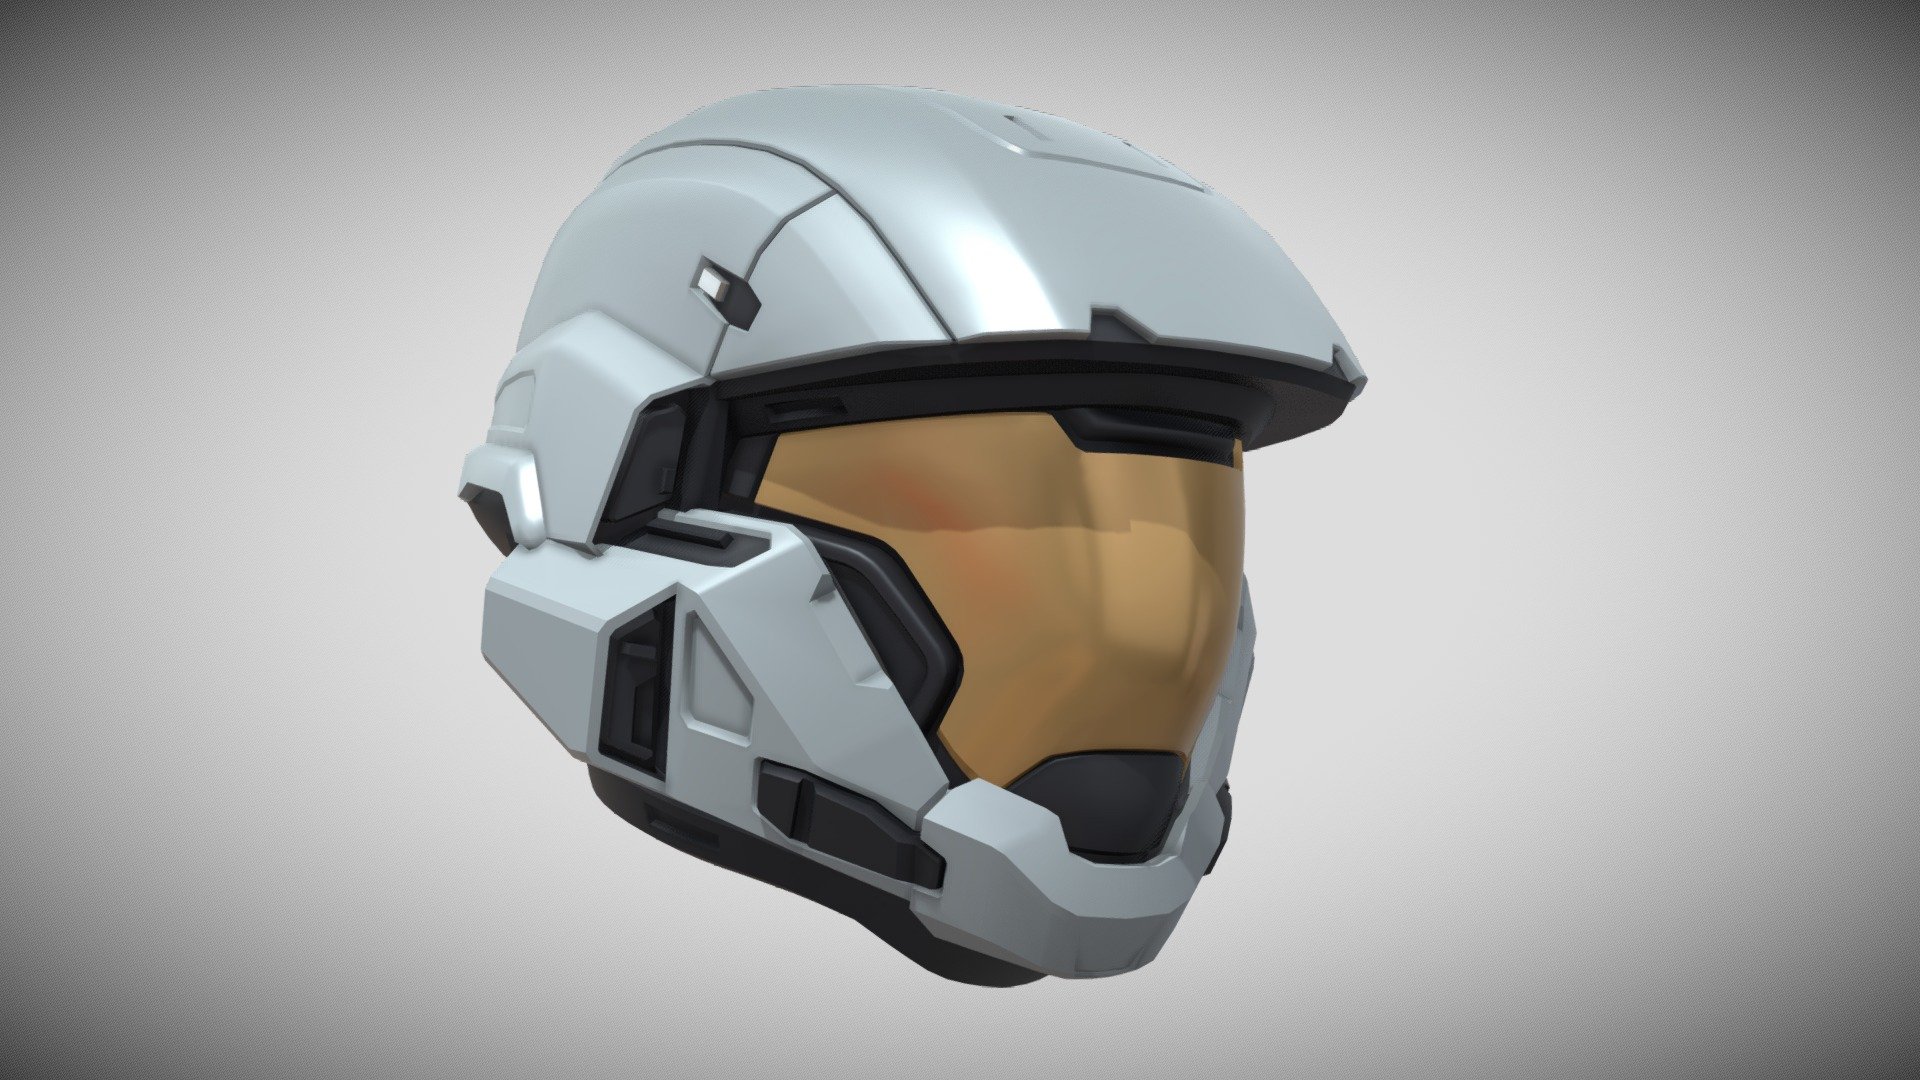 Helmet concept by the talented Isaac Hannaford. 3D modeled by Holiest Mallard (aka Gundam Meister, aka me). Conceived as an optional configuration for Mark V [B] Mjolnir Armor System within the Halo universe around (Halo Reach or Halo Inifinite).

This model is not 3D print compatible. I have not yet UV unwrapped this model.

Tips and donations are welcome! (I do this in what free-time I have T-T ) send to: paypal.me/holiestmallard

Original artwork: https://www.artstation.com/artwork/gRybm

Halo Combat evolved, (as well as its sequels and spin-offs) as related to the source material are property of Microsoft and 343 industries. This model is not for resale on other platforms.

I do not consent to the use of this model in training generative AI 3d model